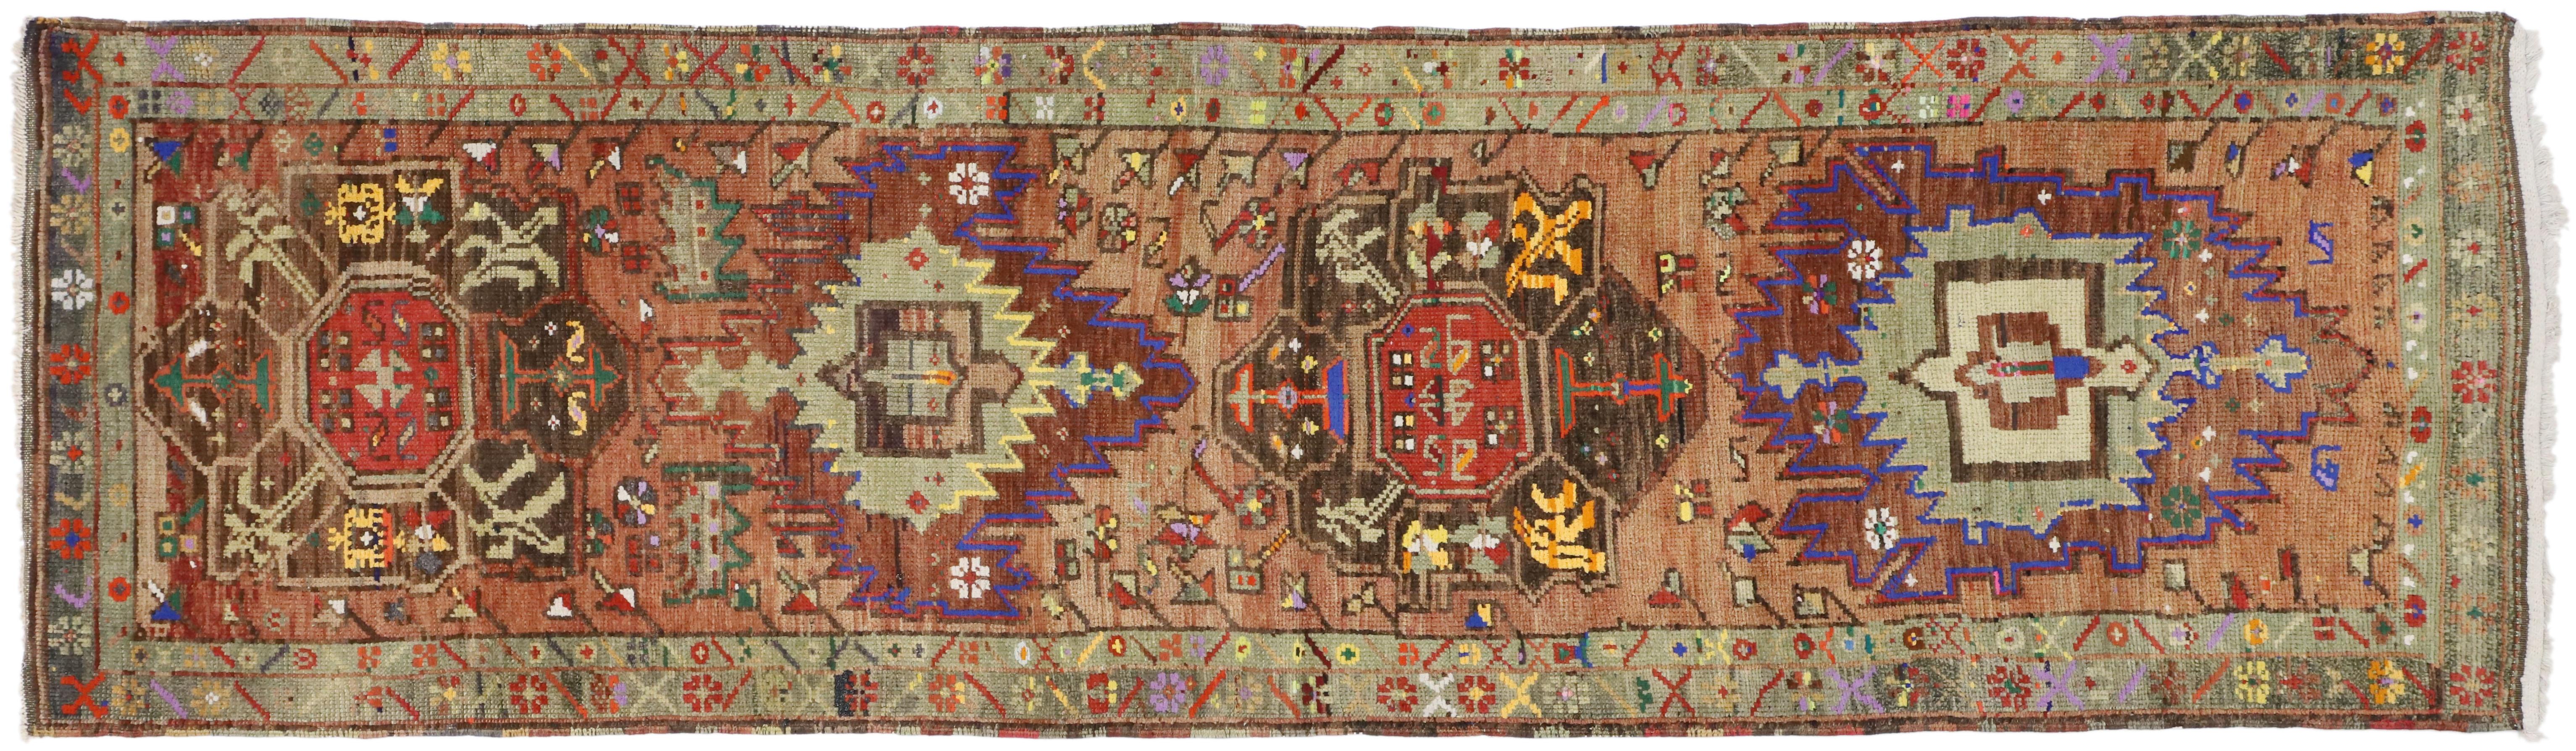 Vintage Turkish Oushak Runner with Retro Art Deco Style For Sale 3